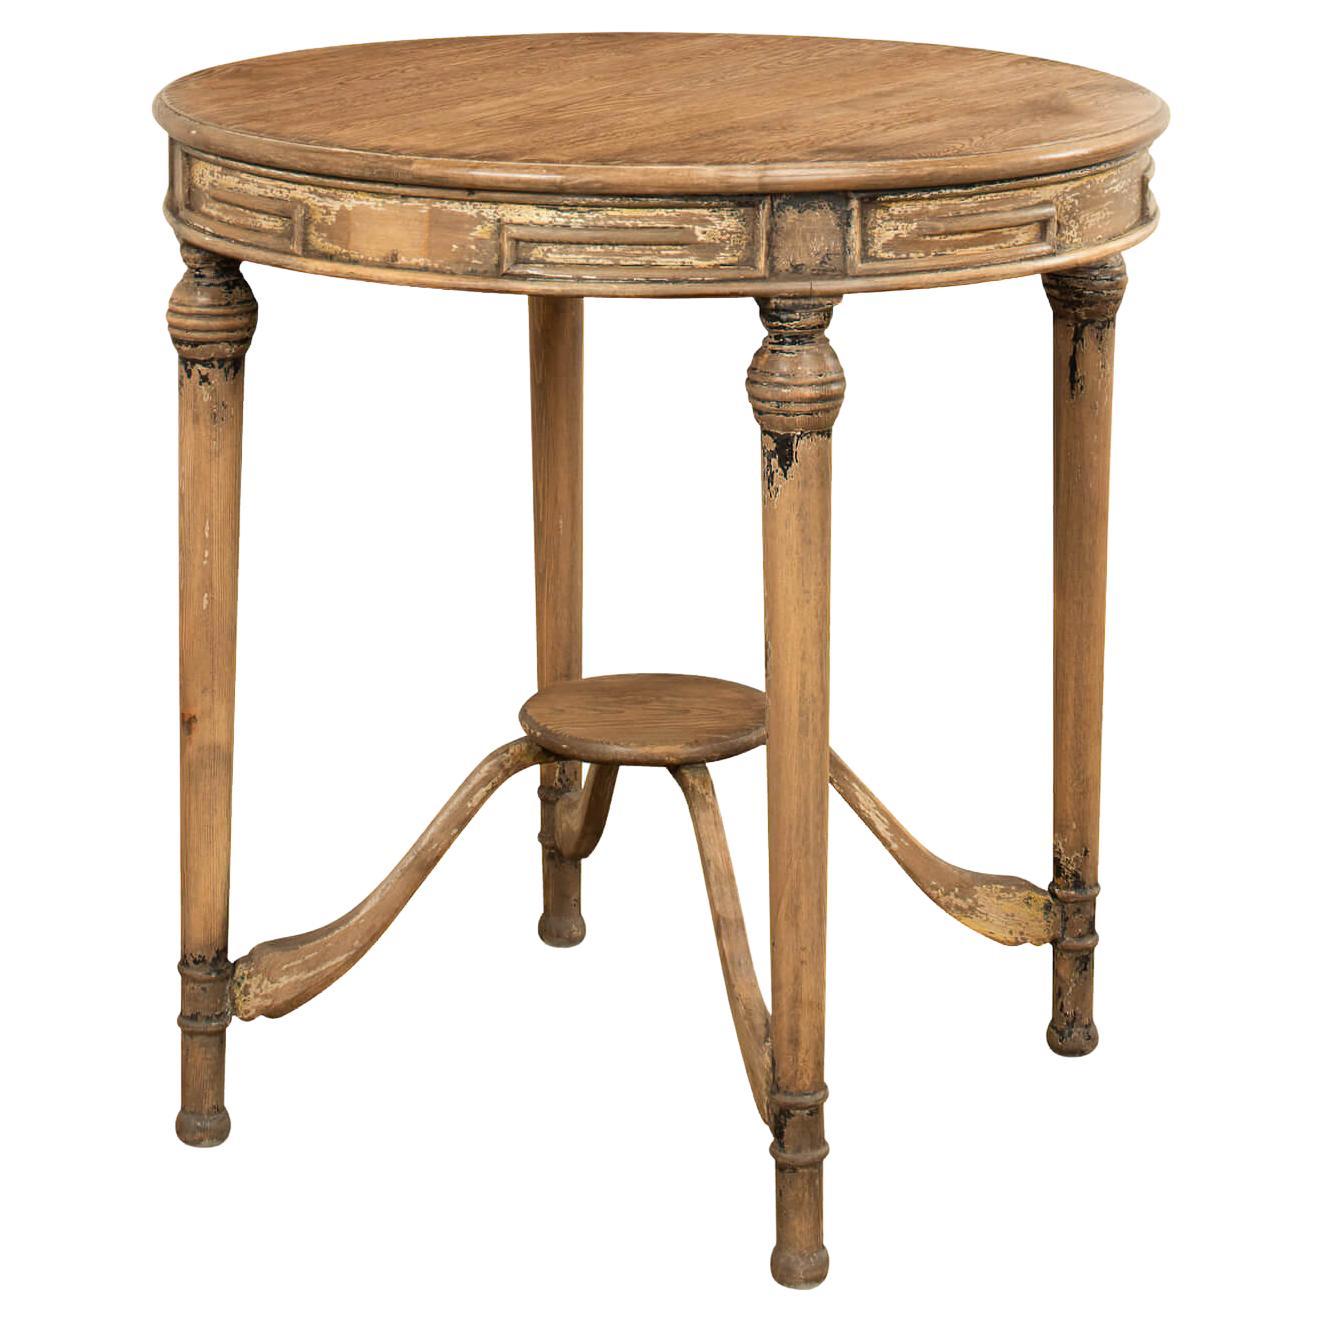 French Country-Style Tea Table